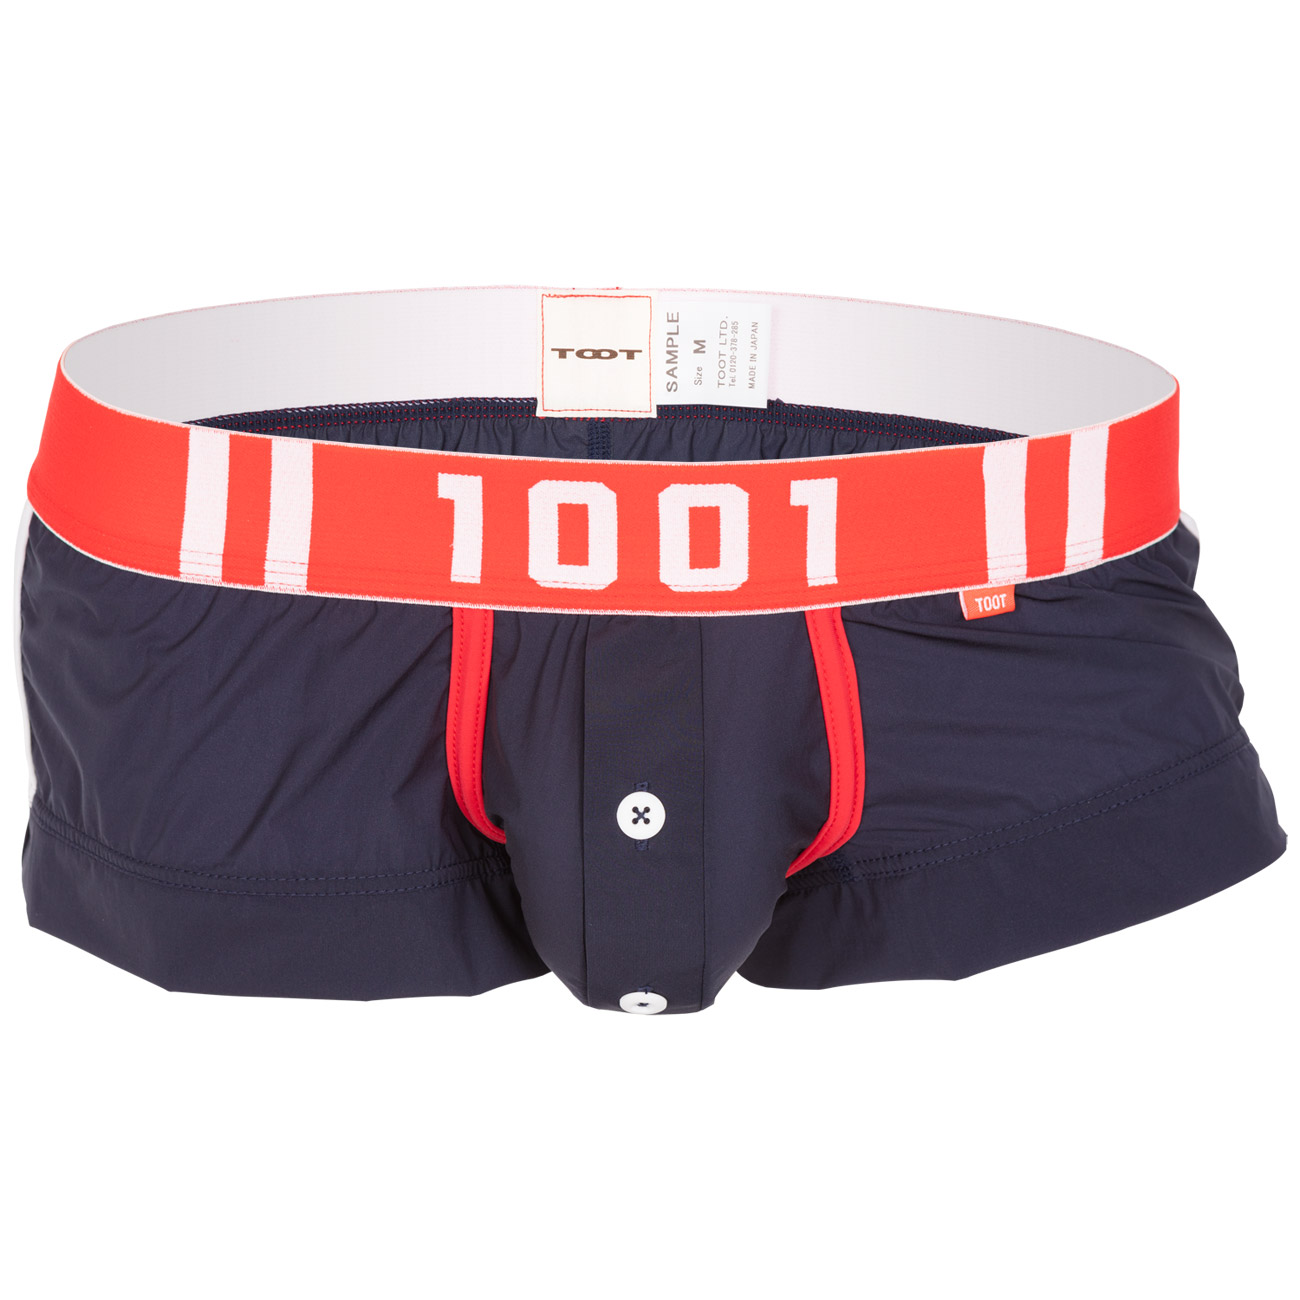 1001 Fit Trunks